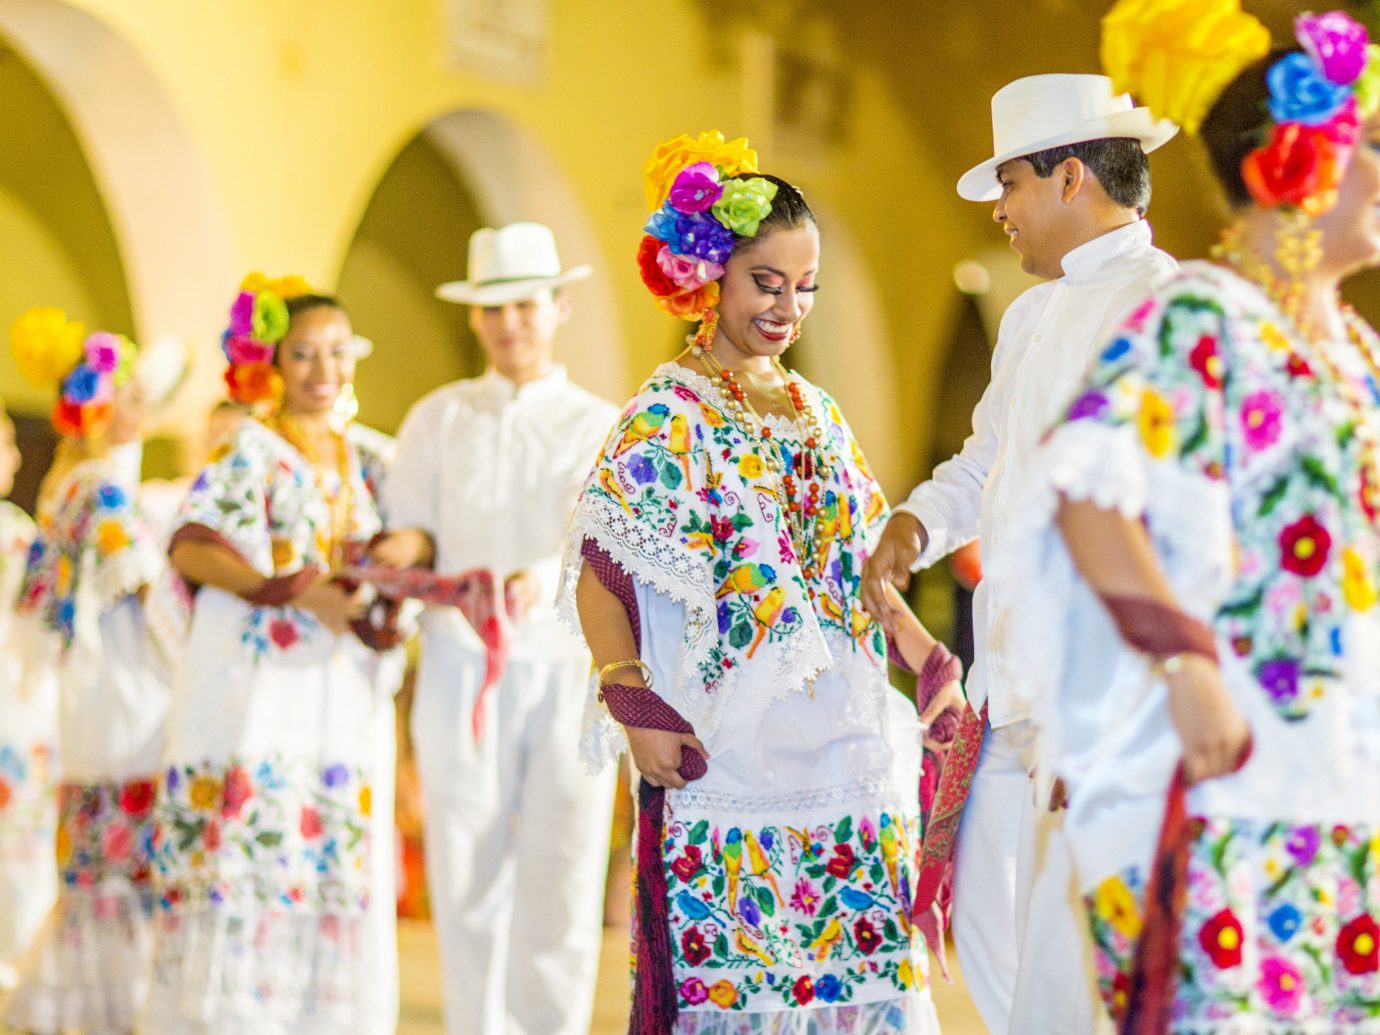 Mexico Trip Ideas Weekend Getaways person dancer performing arts Sport colorful Entertainment standing carnival tradition profession festival dance clown